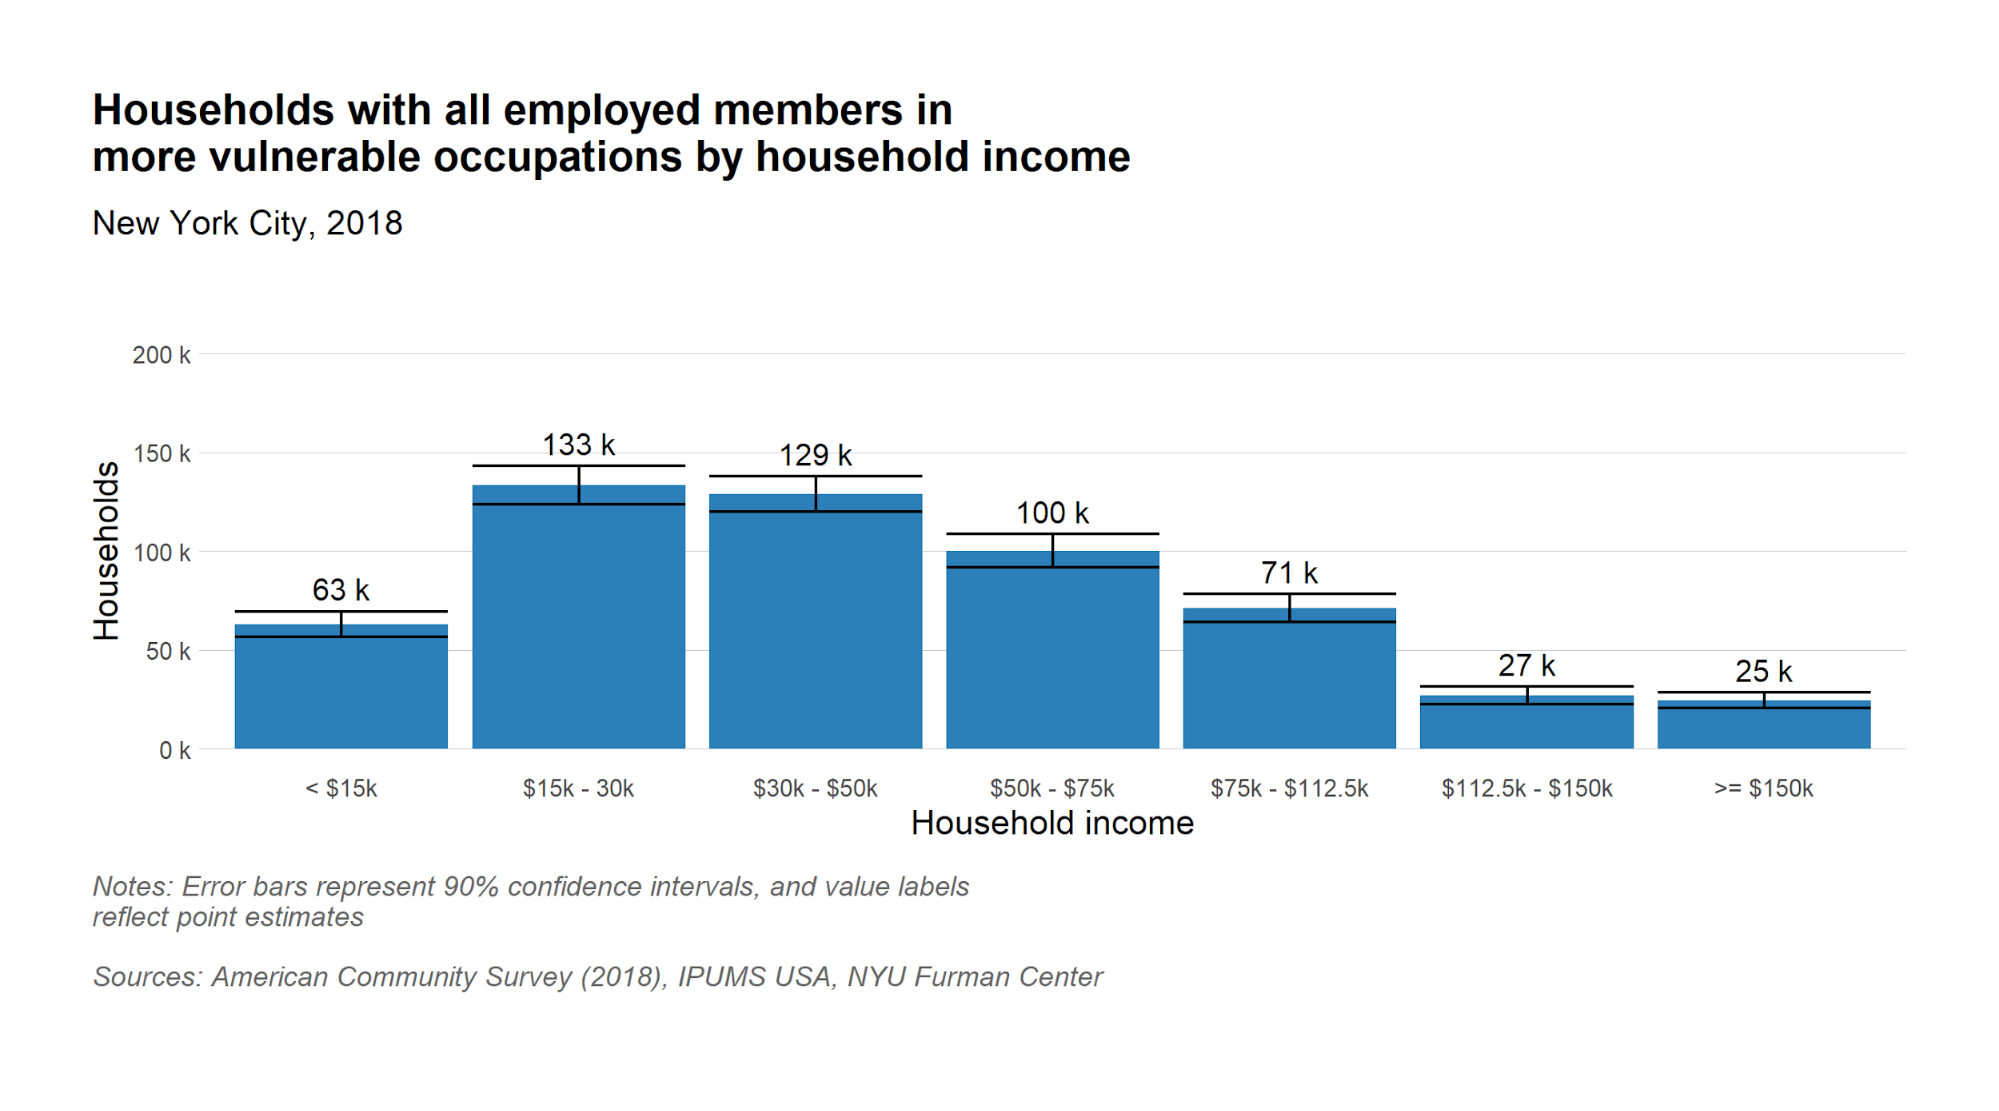 Number of households with all employed members in vulnerable occupations by household income